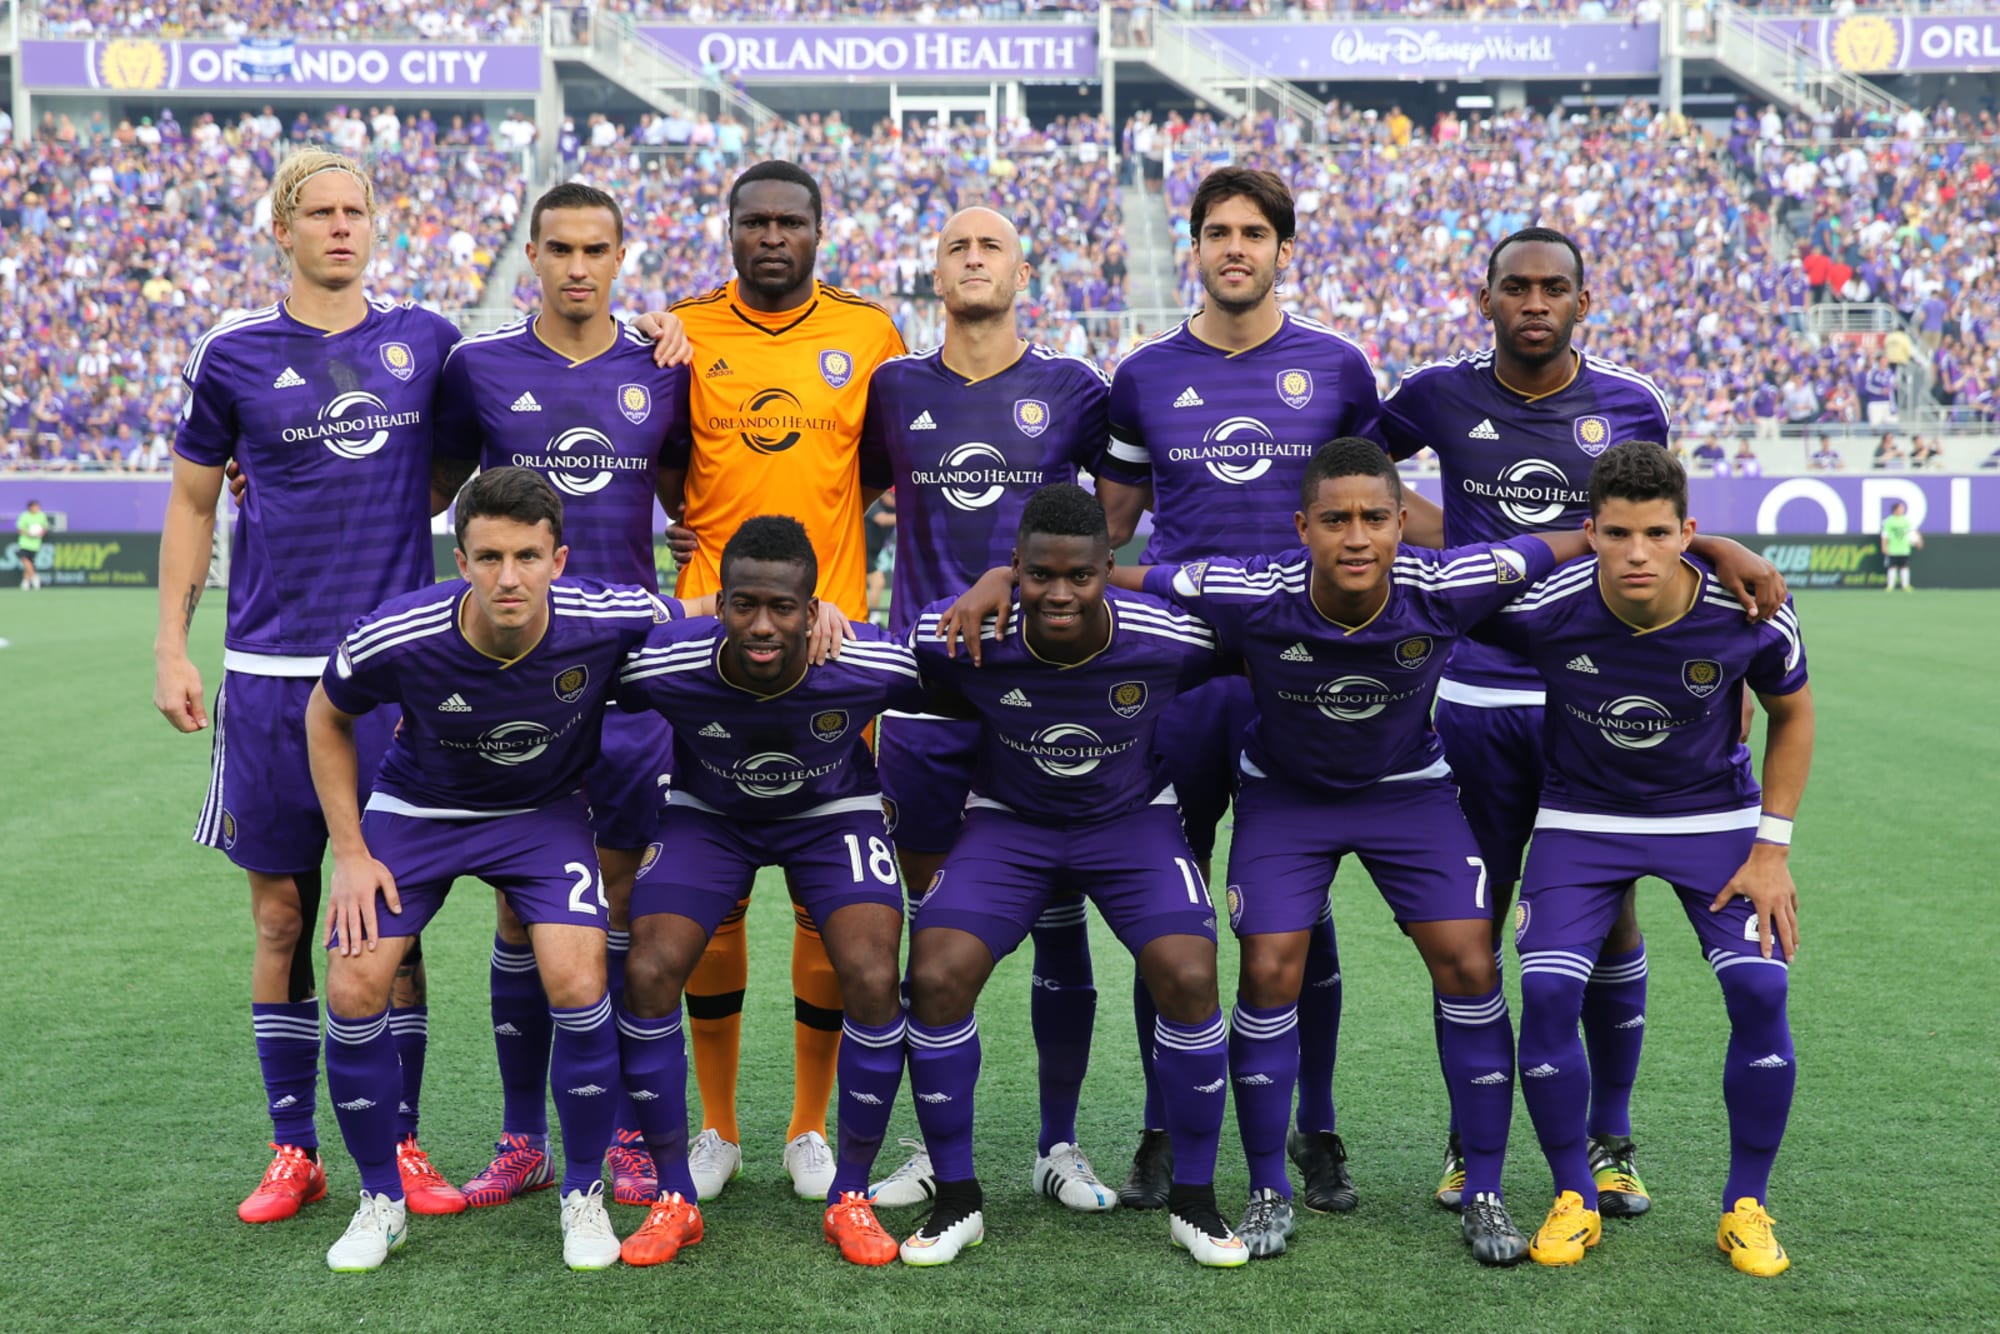 Orlando City's inaugural MLS squad Where are they now?